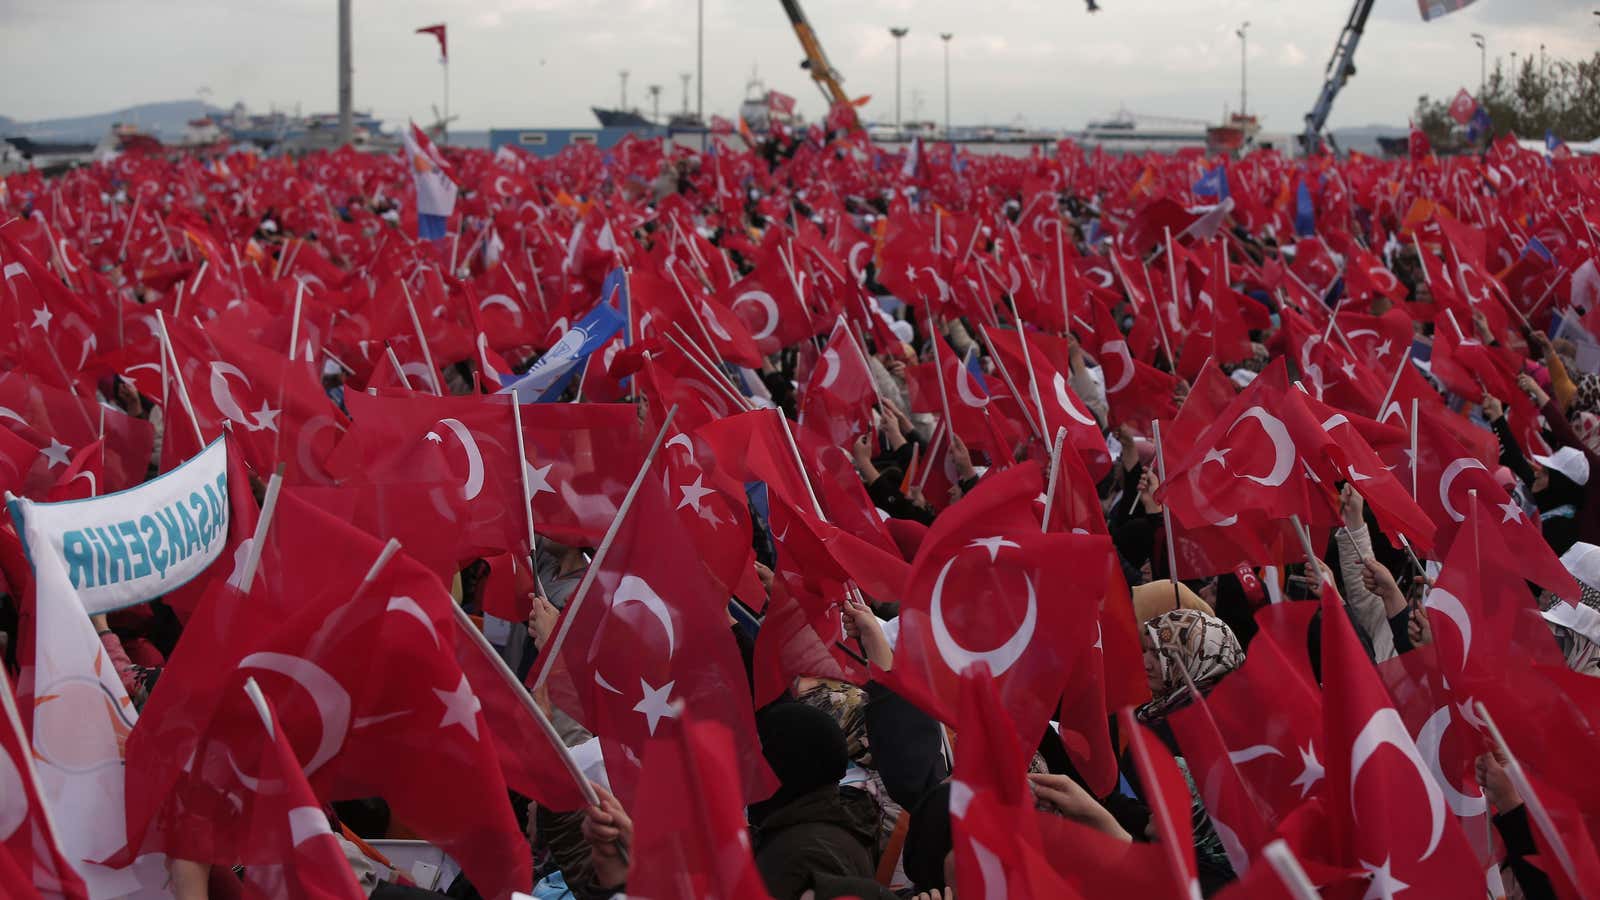 Supporters of Turkish prime minister Ahmet Davutoglu and leader of the Justice and Development Party (AKP), wave Turkish flags as they wait for him to arrive to deliver a speech at a rally in Istanbul on Oct. 25.